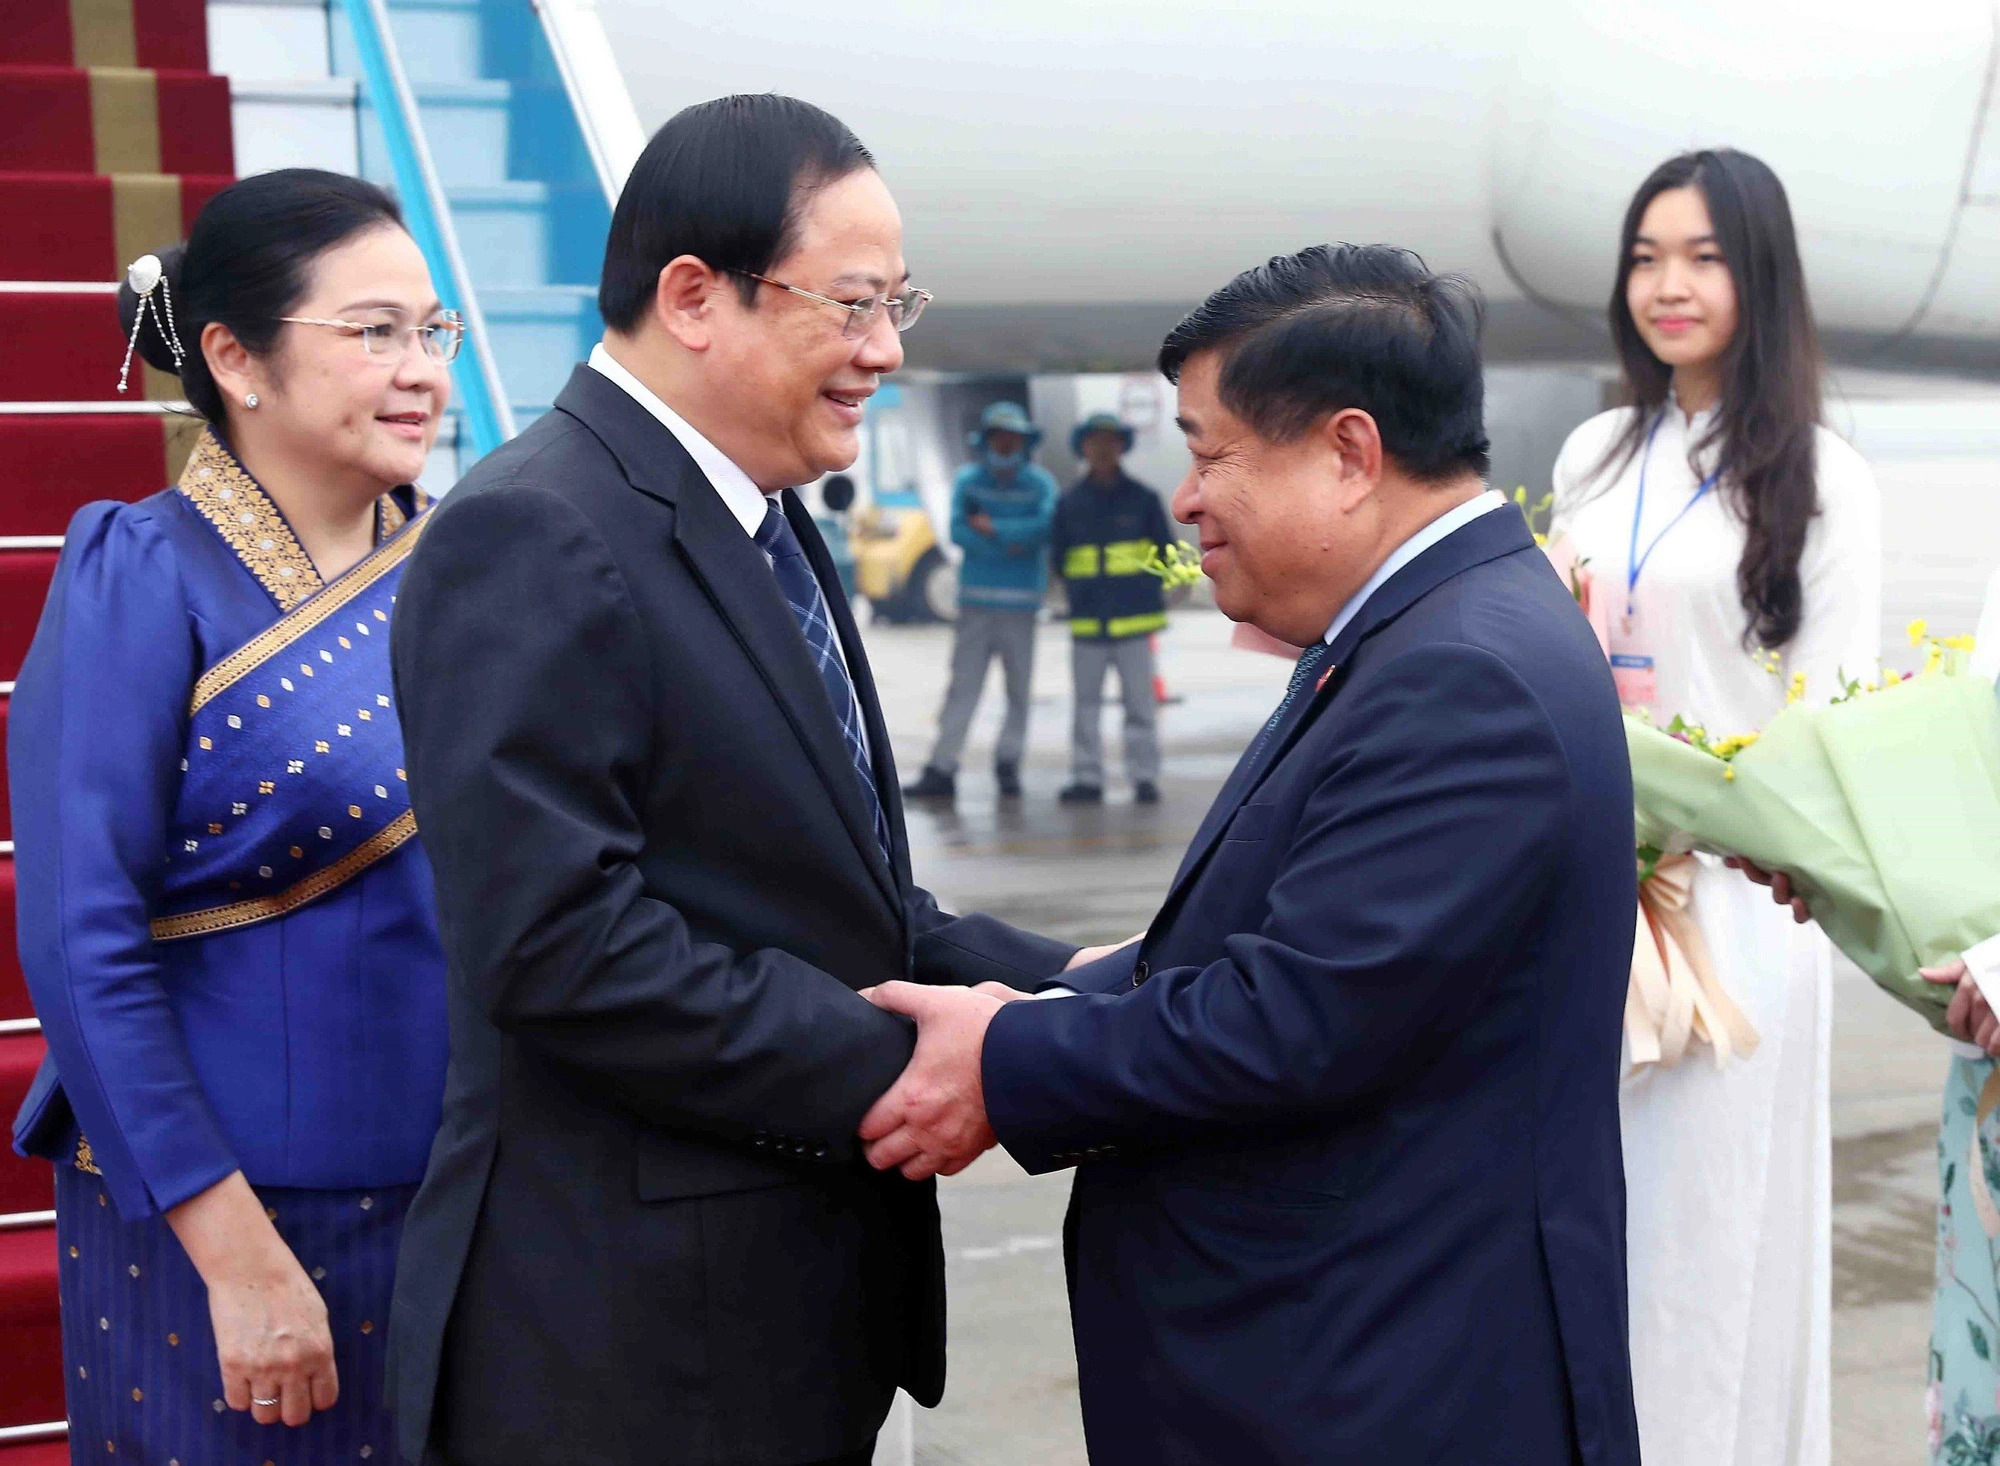 Vietnamese Minister of Planning and Investment Nguyen Chi Dung (R) welcomes Lao Prime Minister Sonexay Siphandone and his spouse at Noi Bai International Airport in Hanoi, January 6, 2023. Photo: Vietnam News Agency